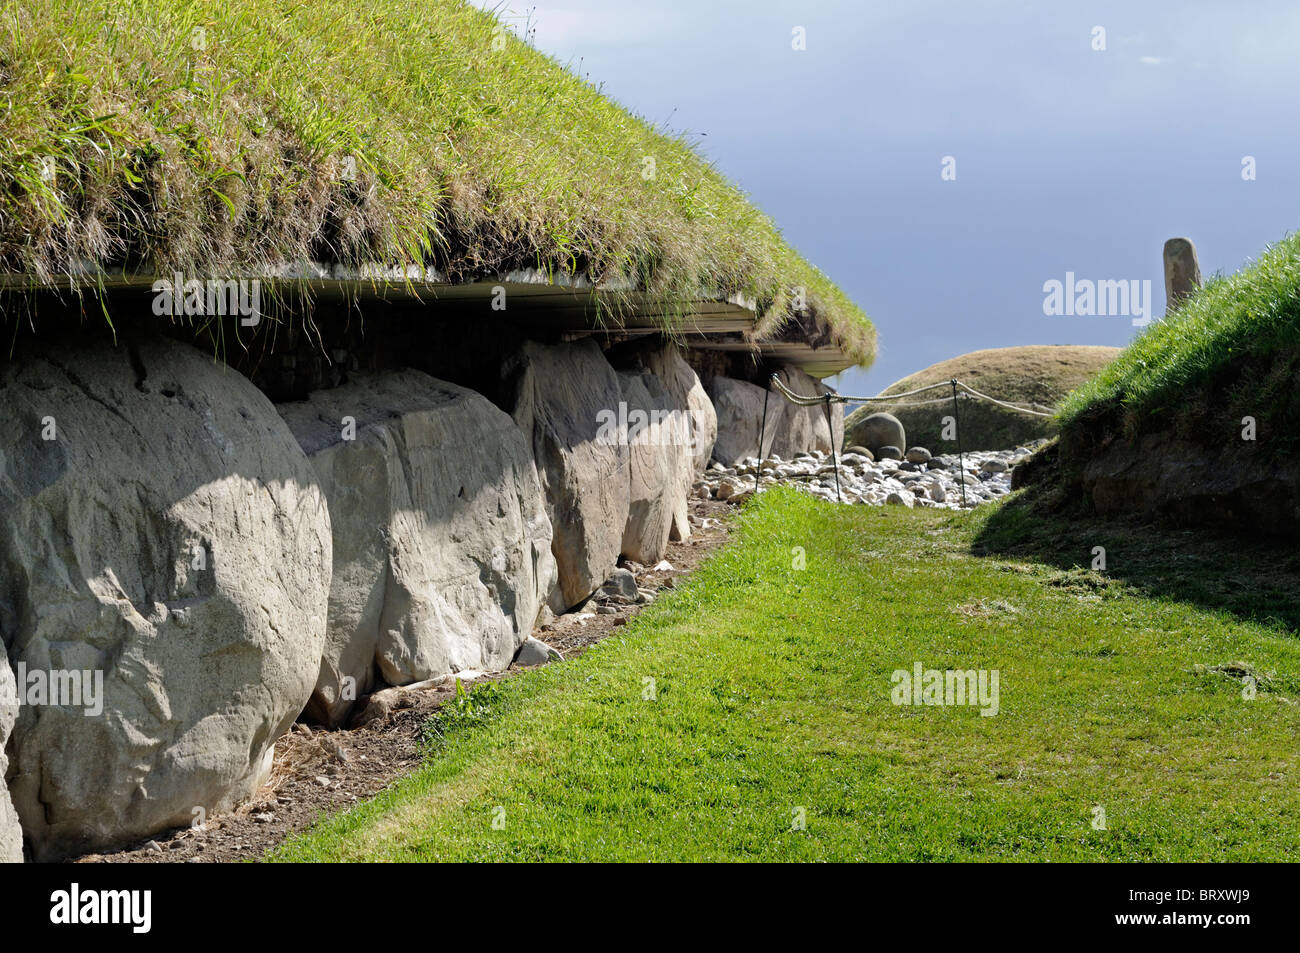 Knowth neolithic passage tomb  boyne valley county meath ireland world heritage site archaeological equinox Stock Photo